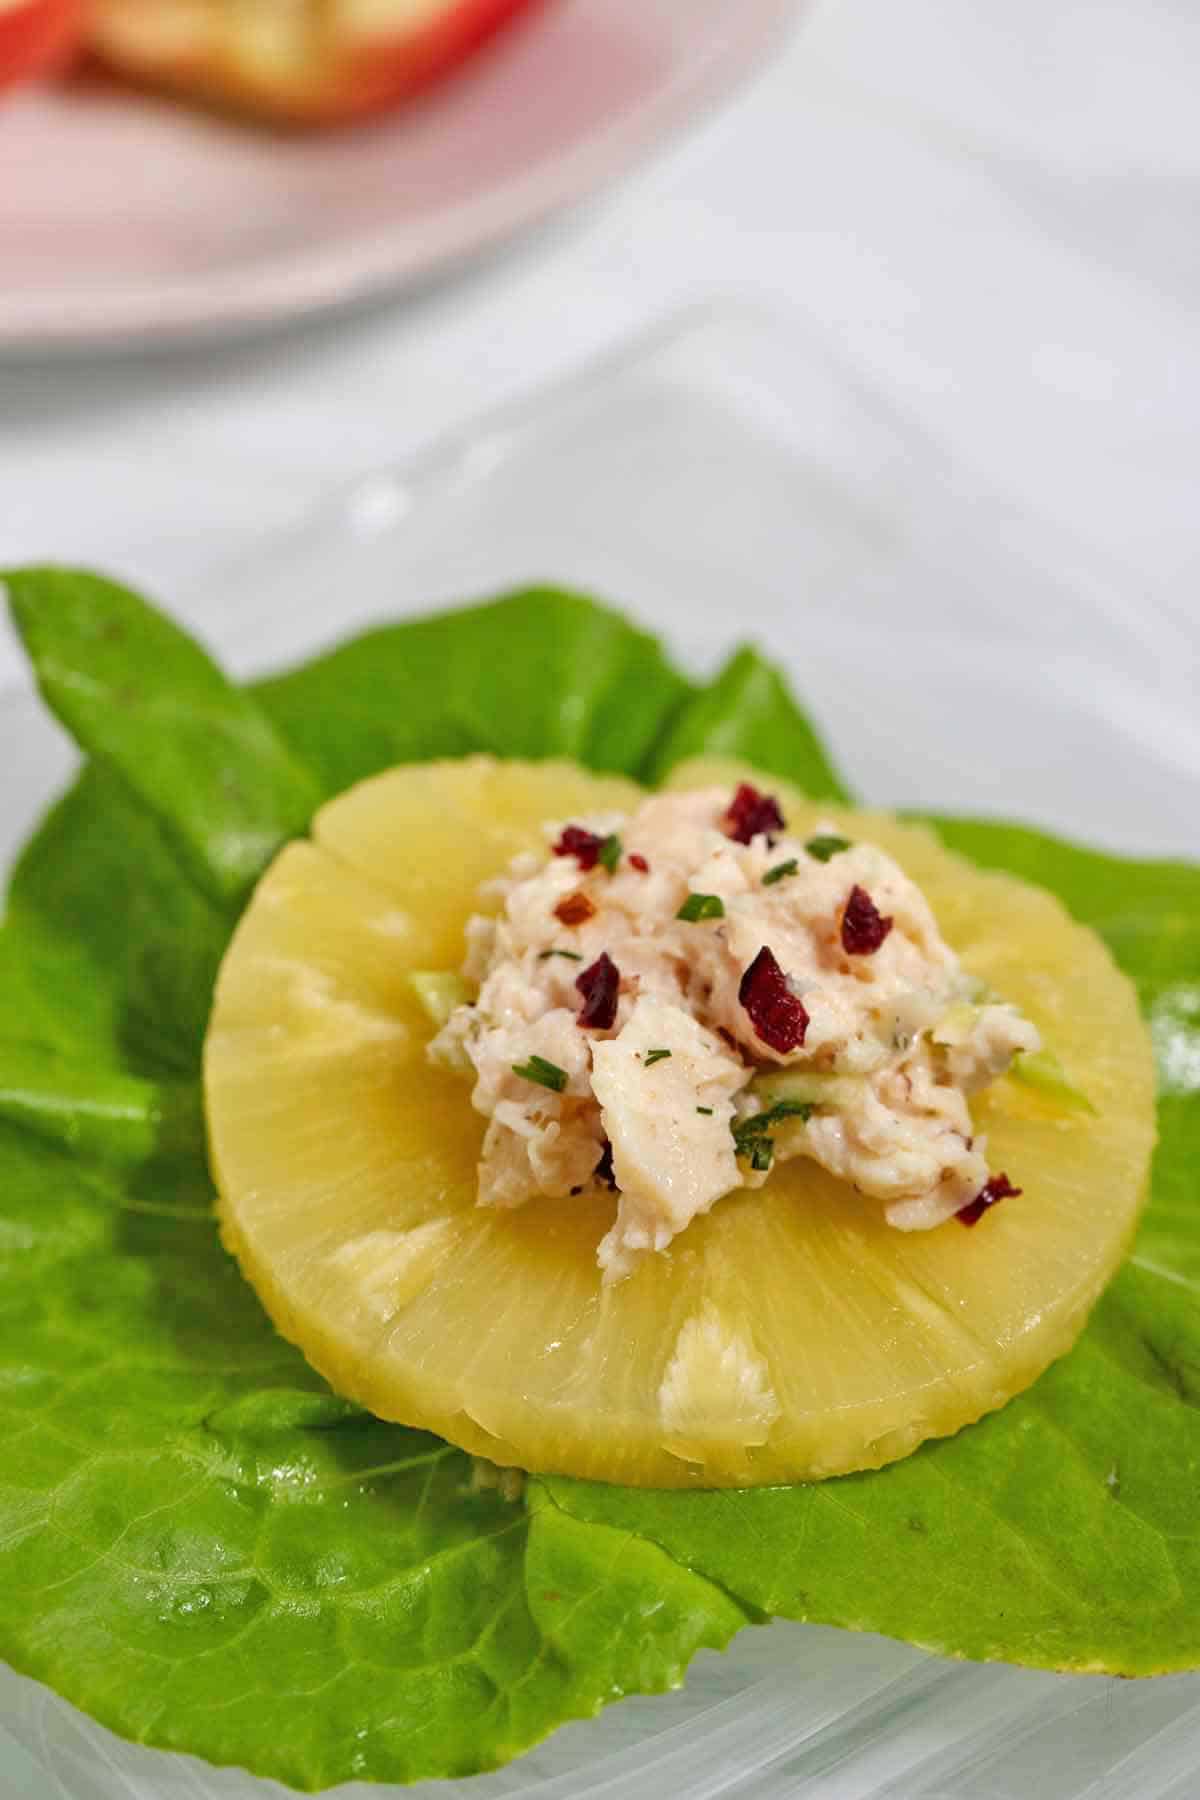 Pineapple ring stuffed with chicken salad on a bed of lettuce.